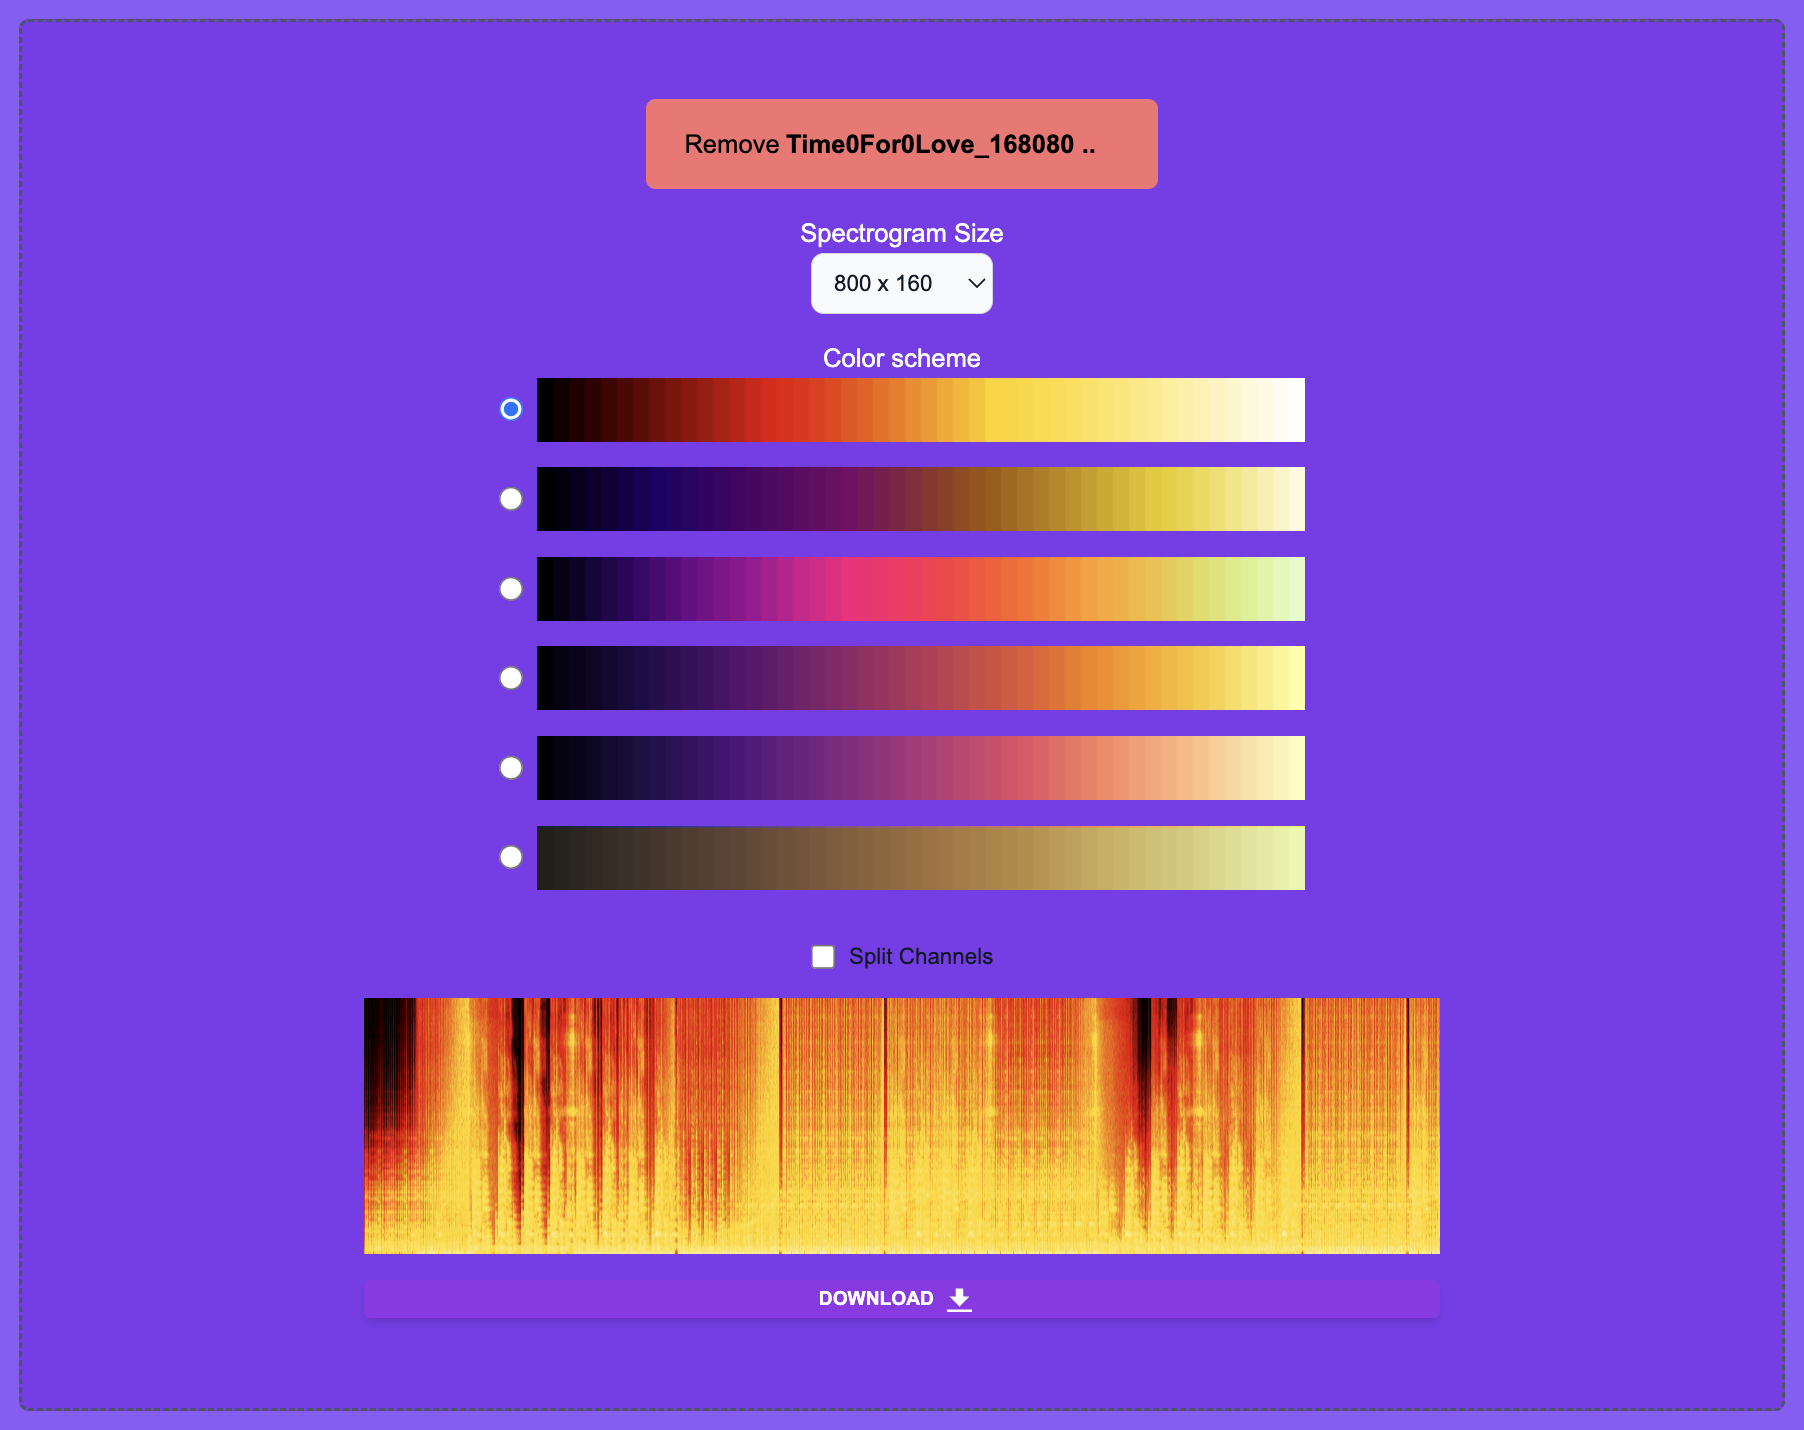 RouteNote Convert – how to generate a spectrogram image from an audio file online for free